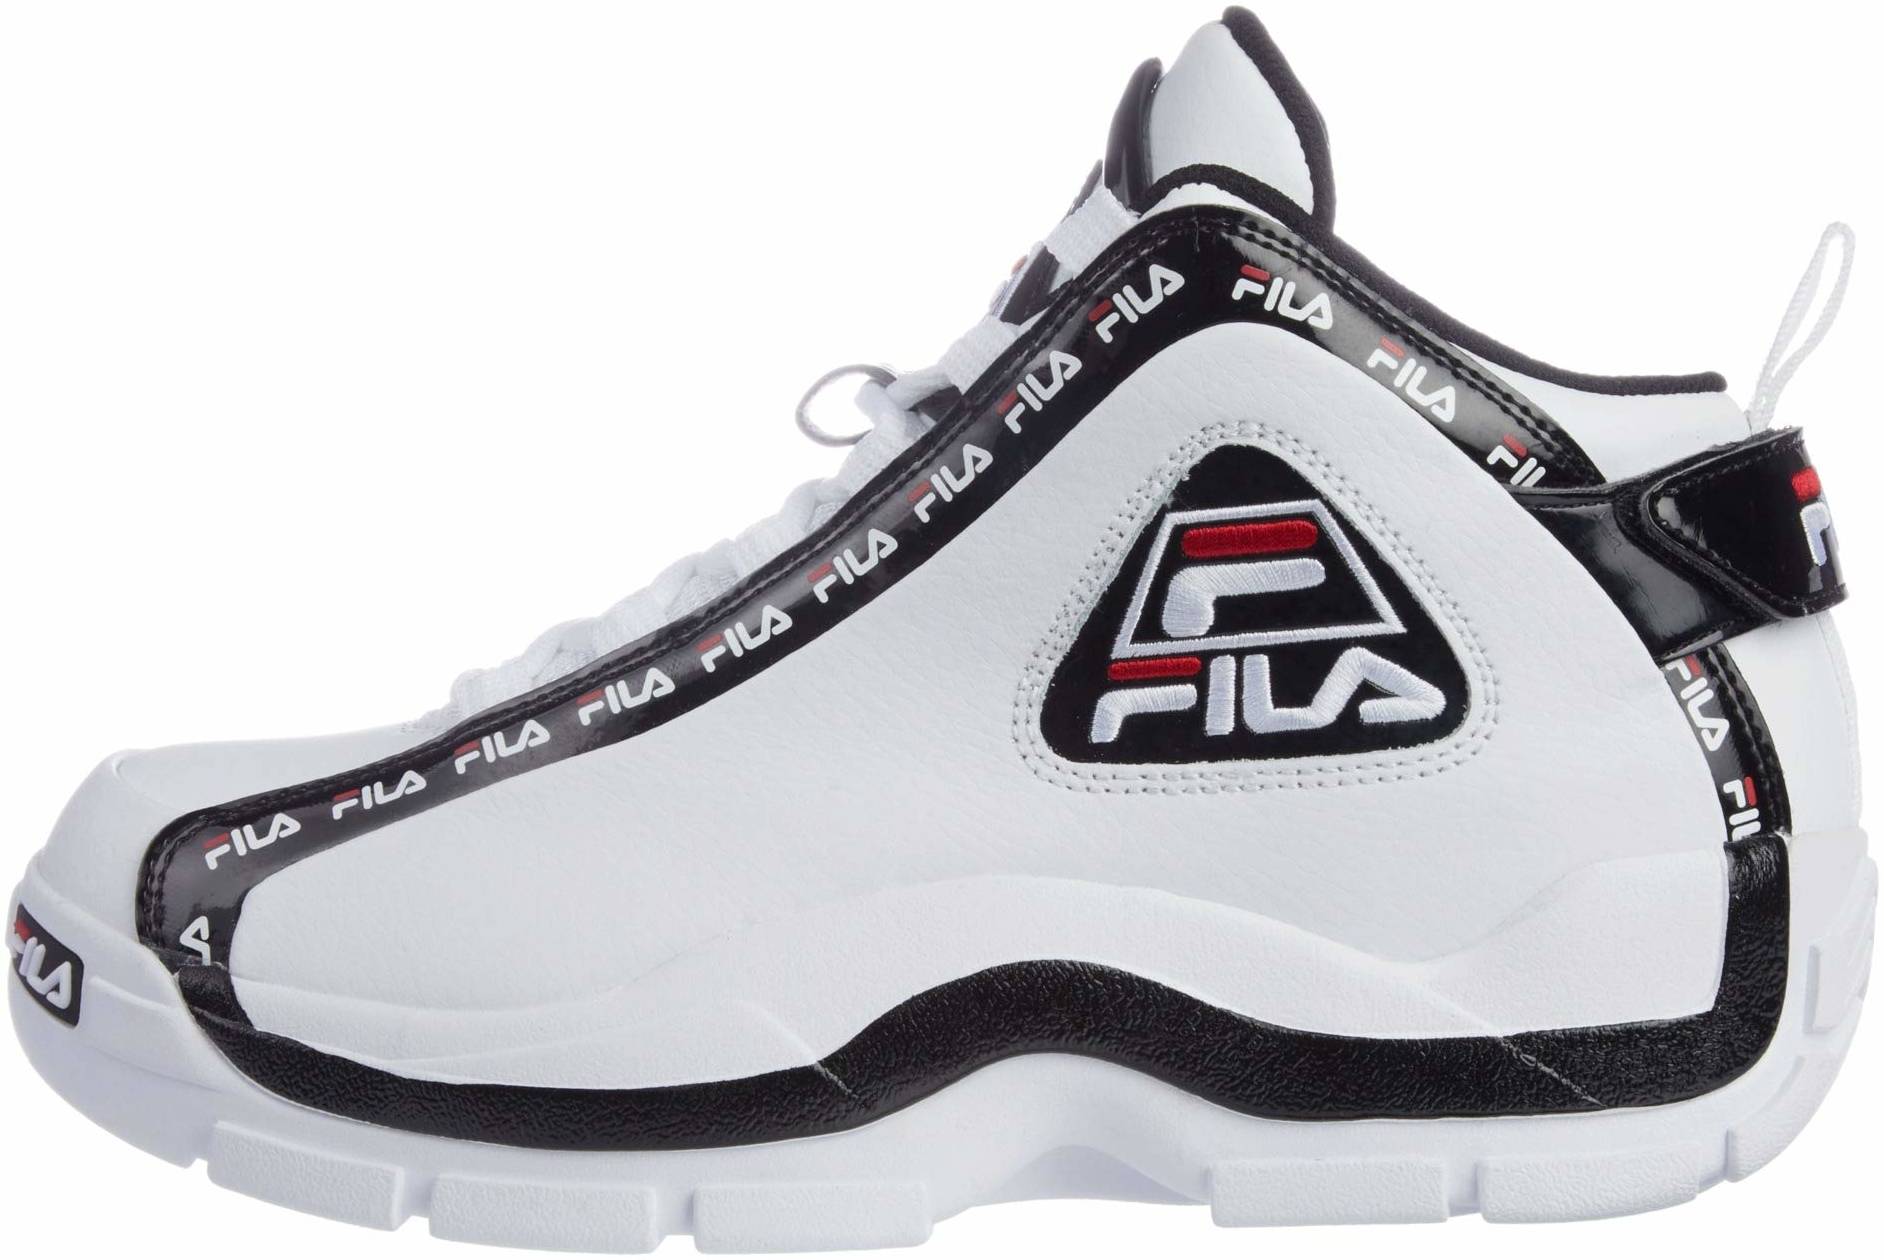 Only $60 + Review of Fila Grant Hill 2 